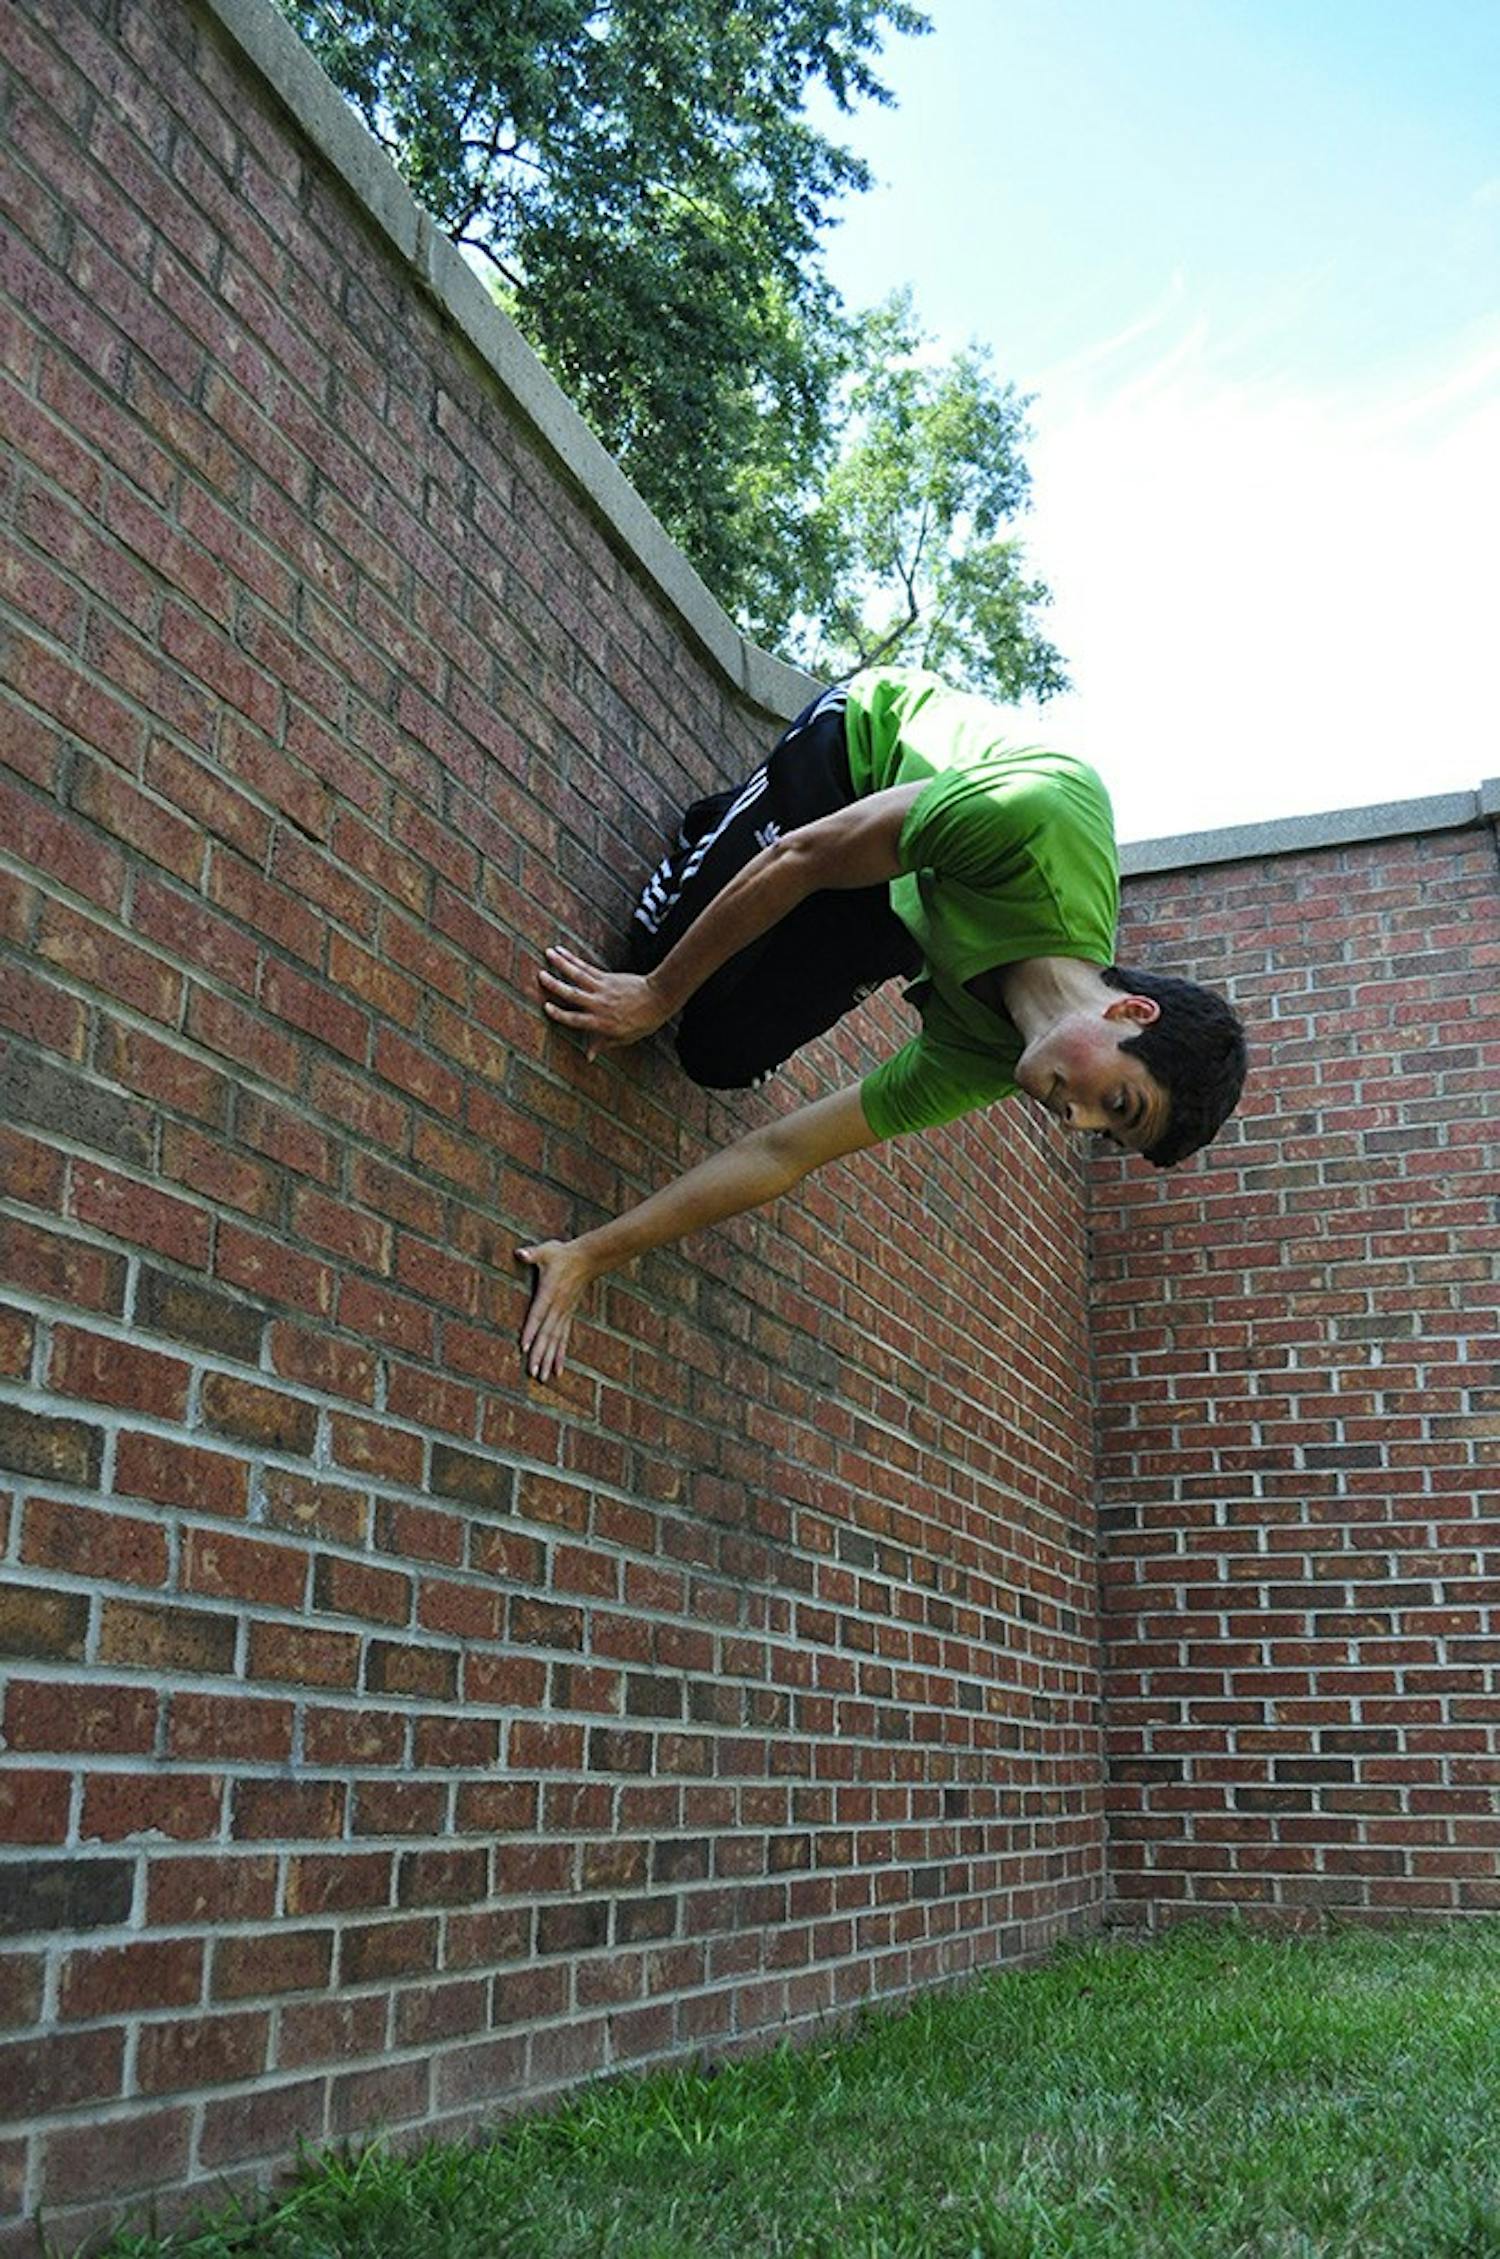 	Holaus doing a wall spin